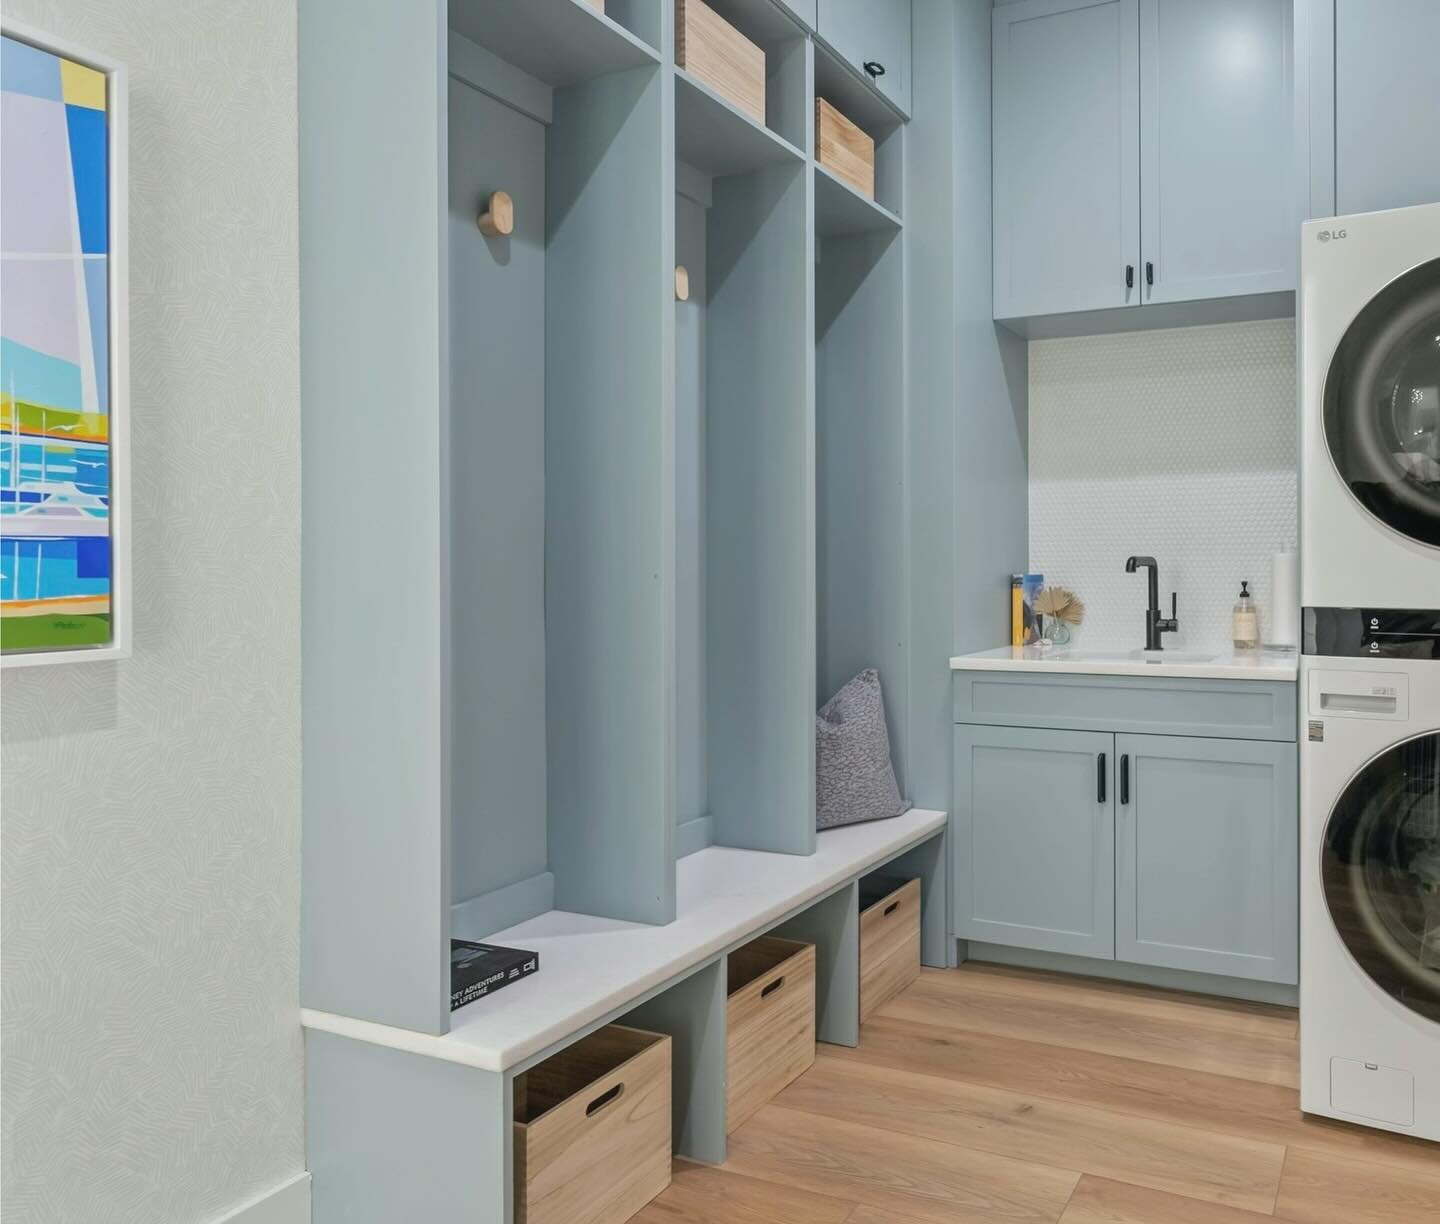 stoked on how this laundry room I designed came out✨
▫️the perfect shade of blue
▫️mix of metals + natural wood hardware 
▫️subtle palm leaf wallpaper 
▫️penny round backsplash 
▫️and a local artist painting 

Easy on the eyes🤍